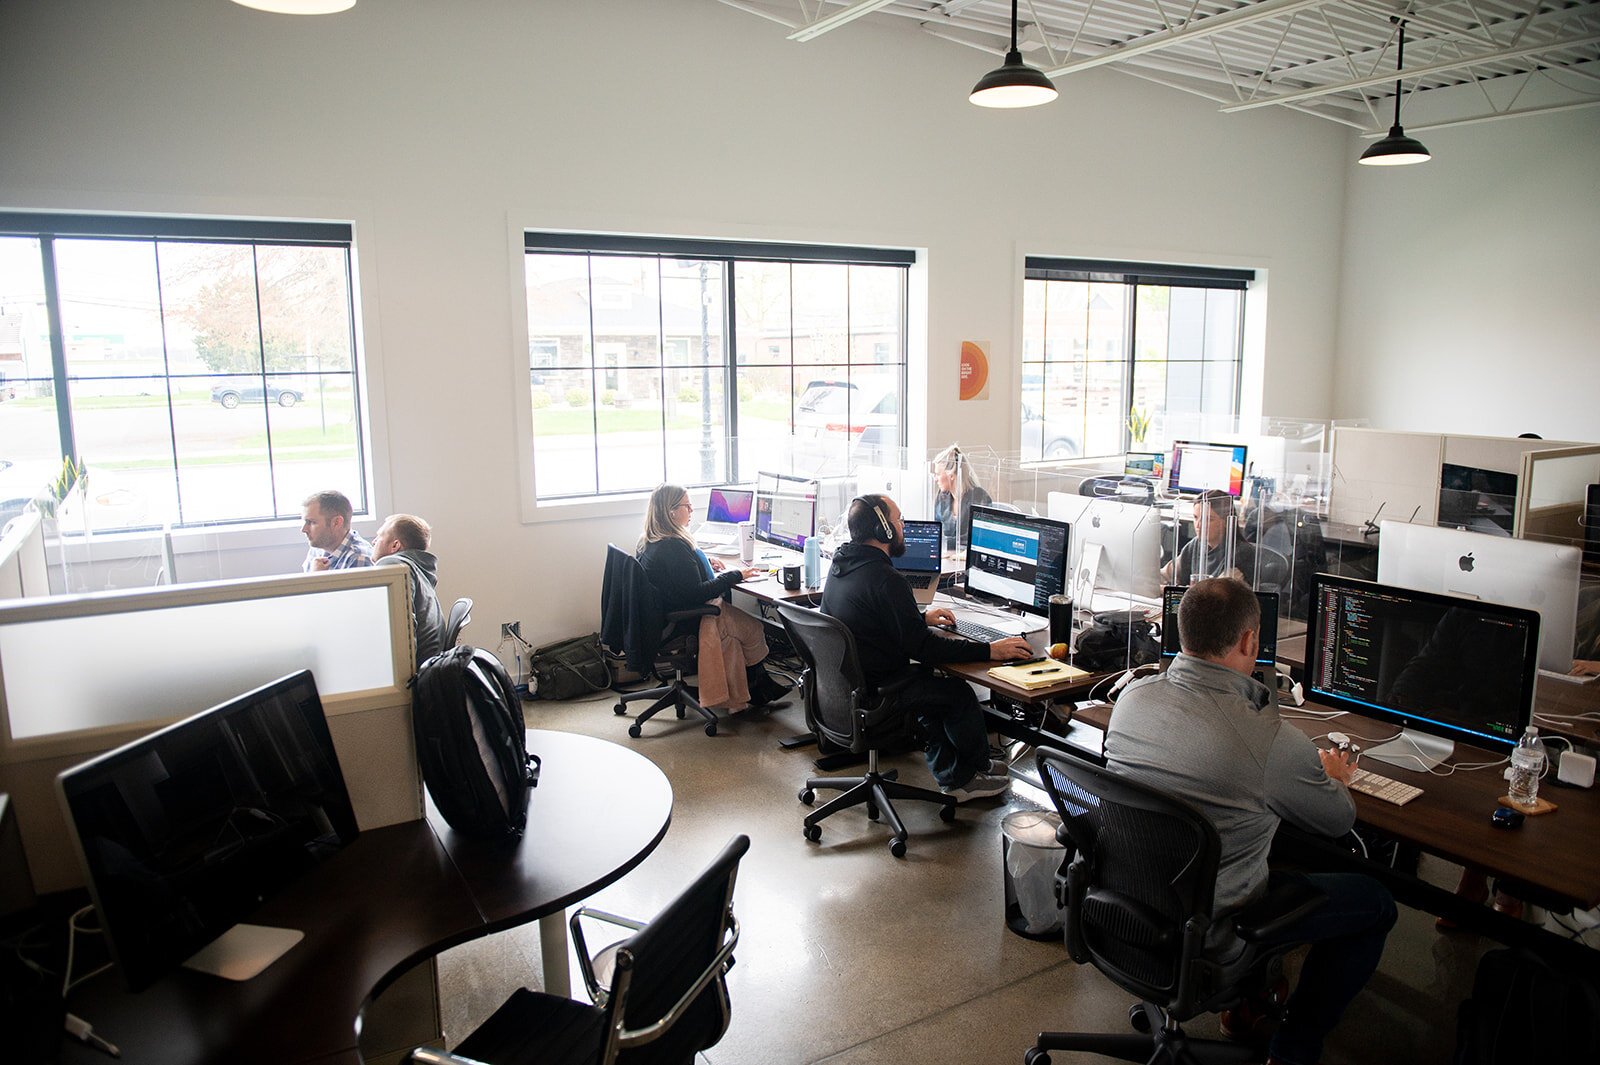 Reusser's team has converted their Downtown Roanoke office at 150 S. Main St. into a rotating coworking-style space, free of personal memorabilia. 